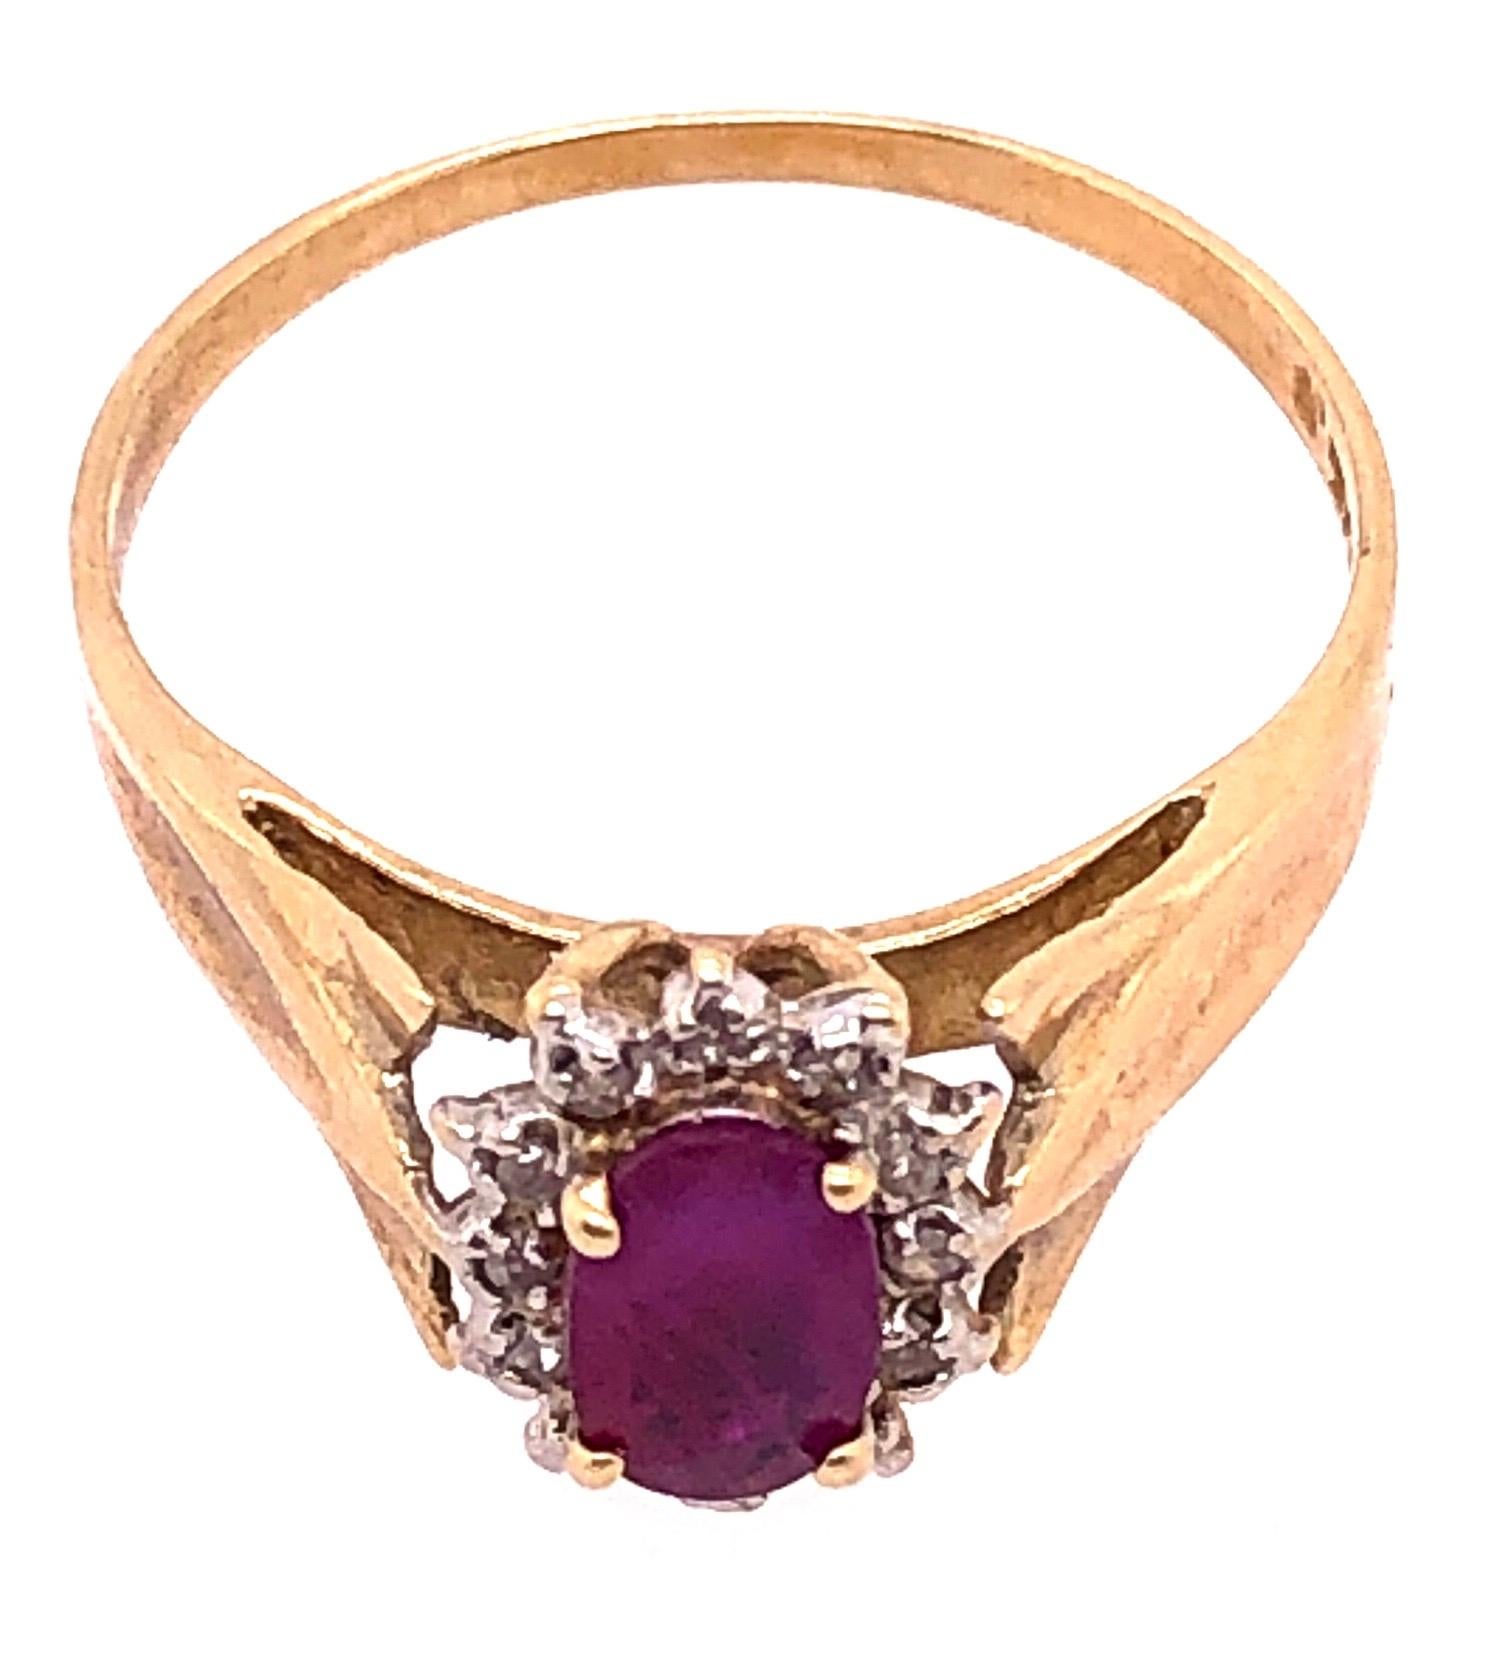 14 Karat Yellow Gold Free Form Ruby With diamond Accents Ring 
Size 7
2.46 grams total weight.